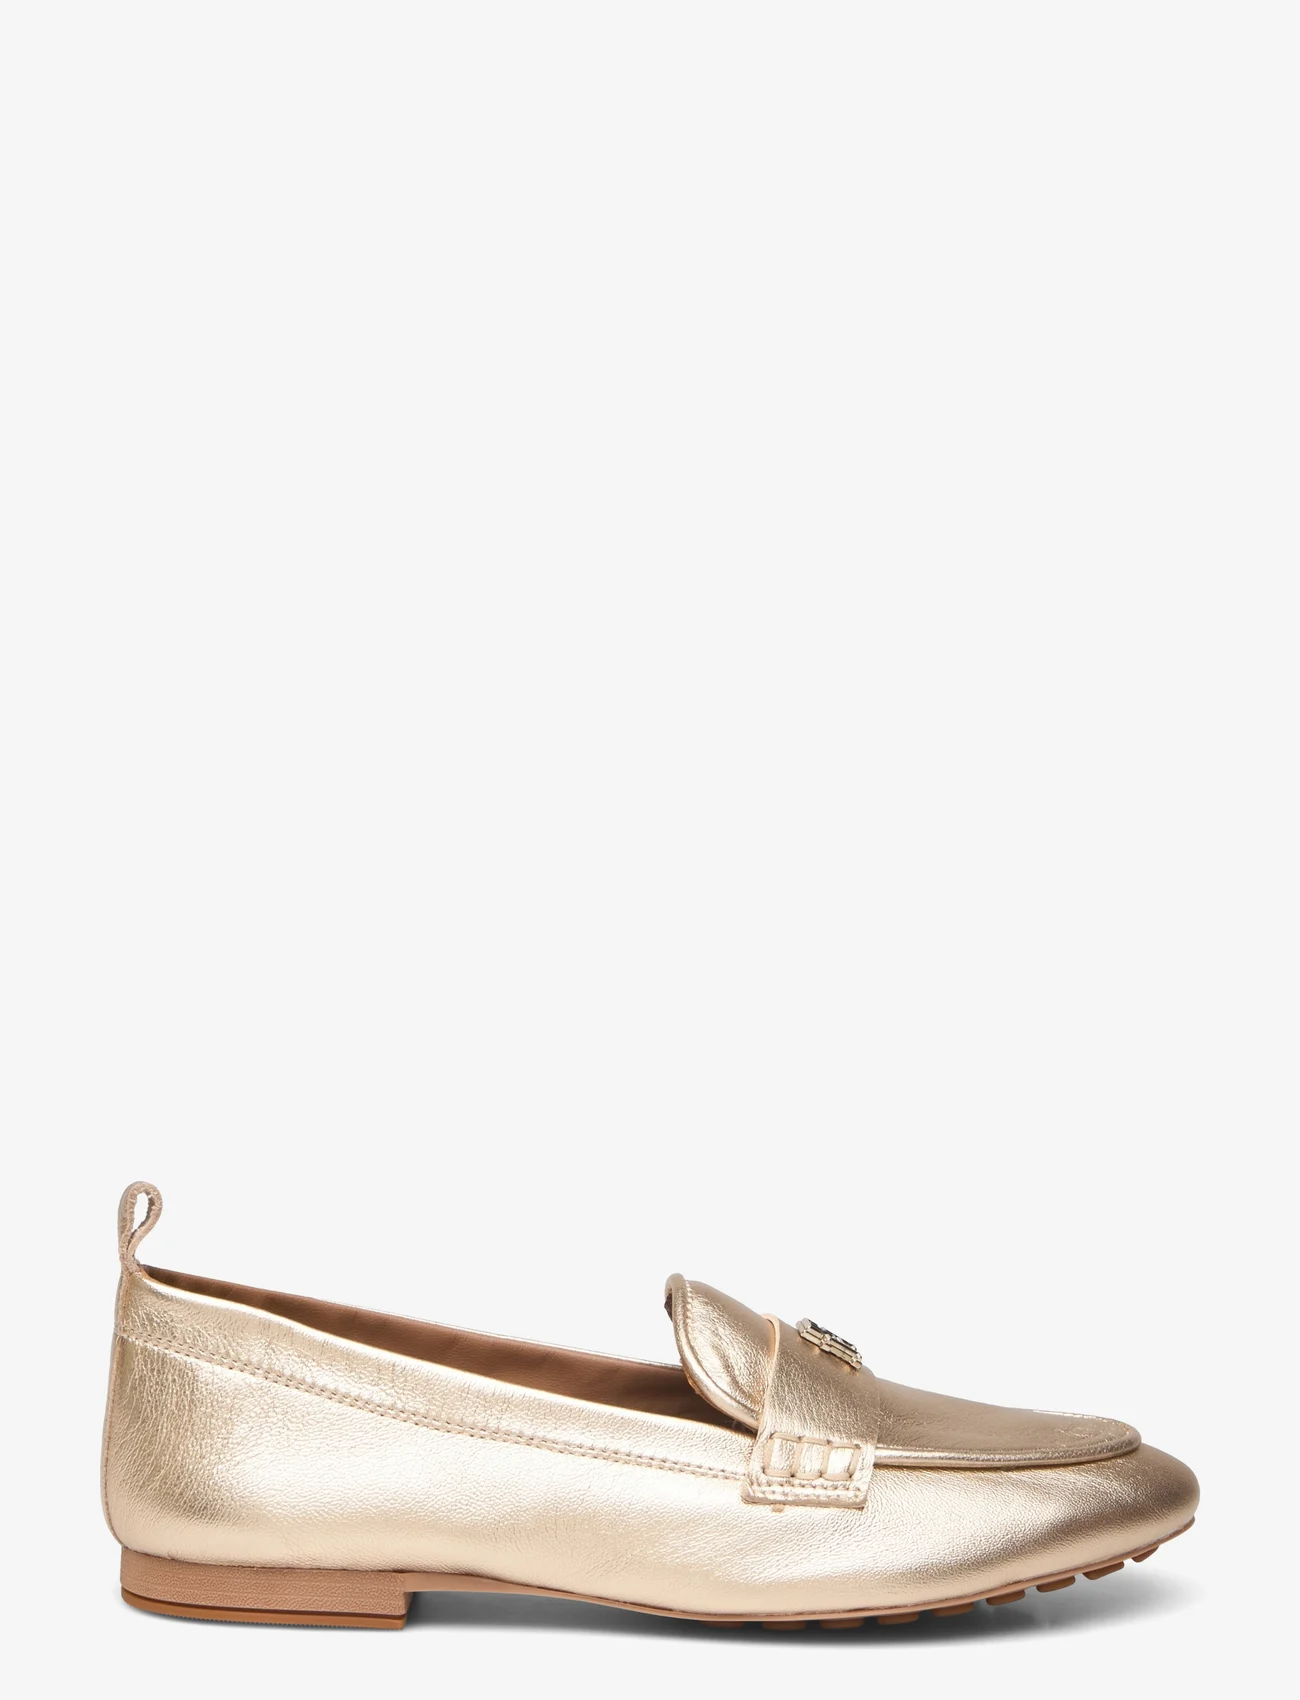 Tommy Hilfiger - TH LEATHER MOCCASIN GOLD - buty wiosenne - gold - 1